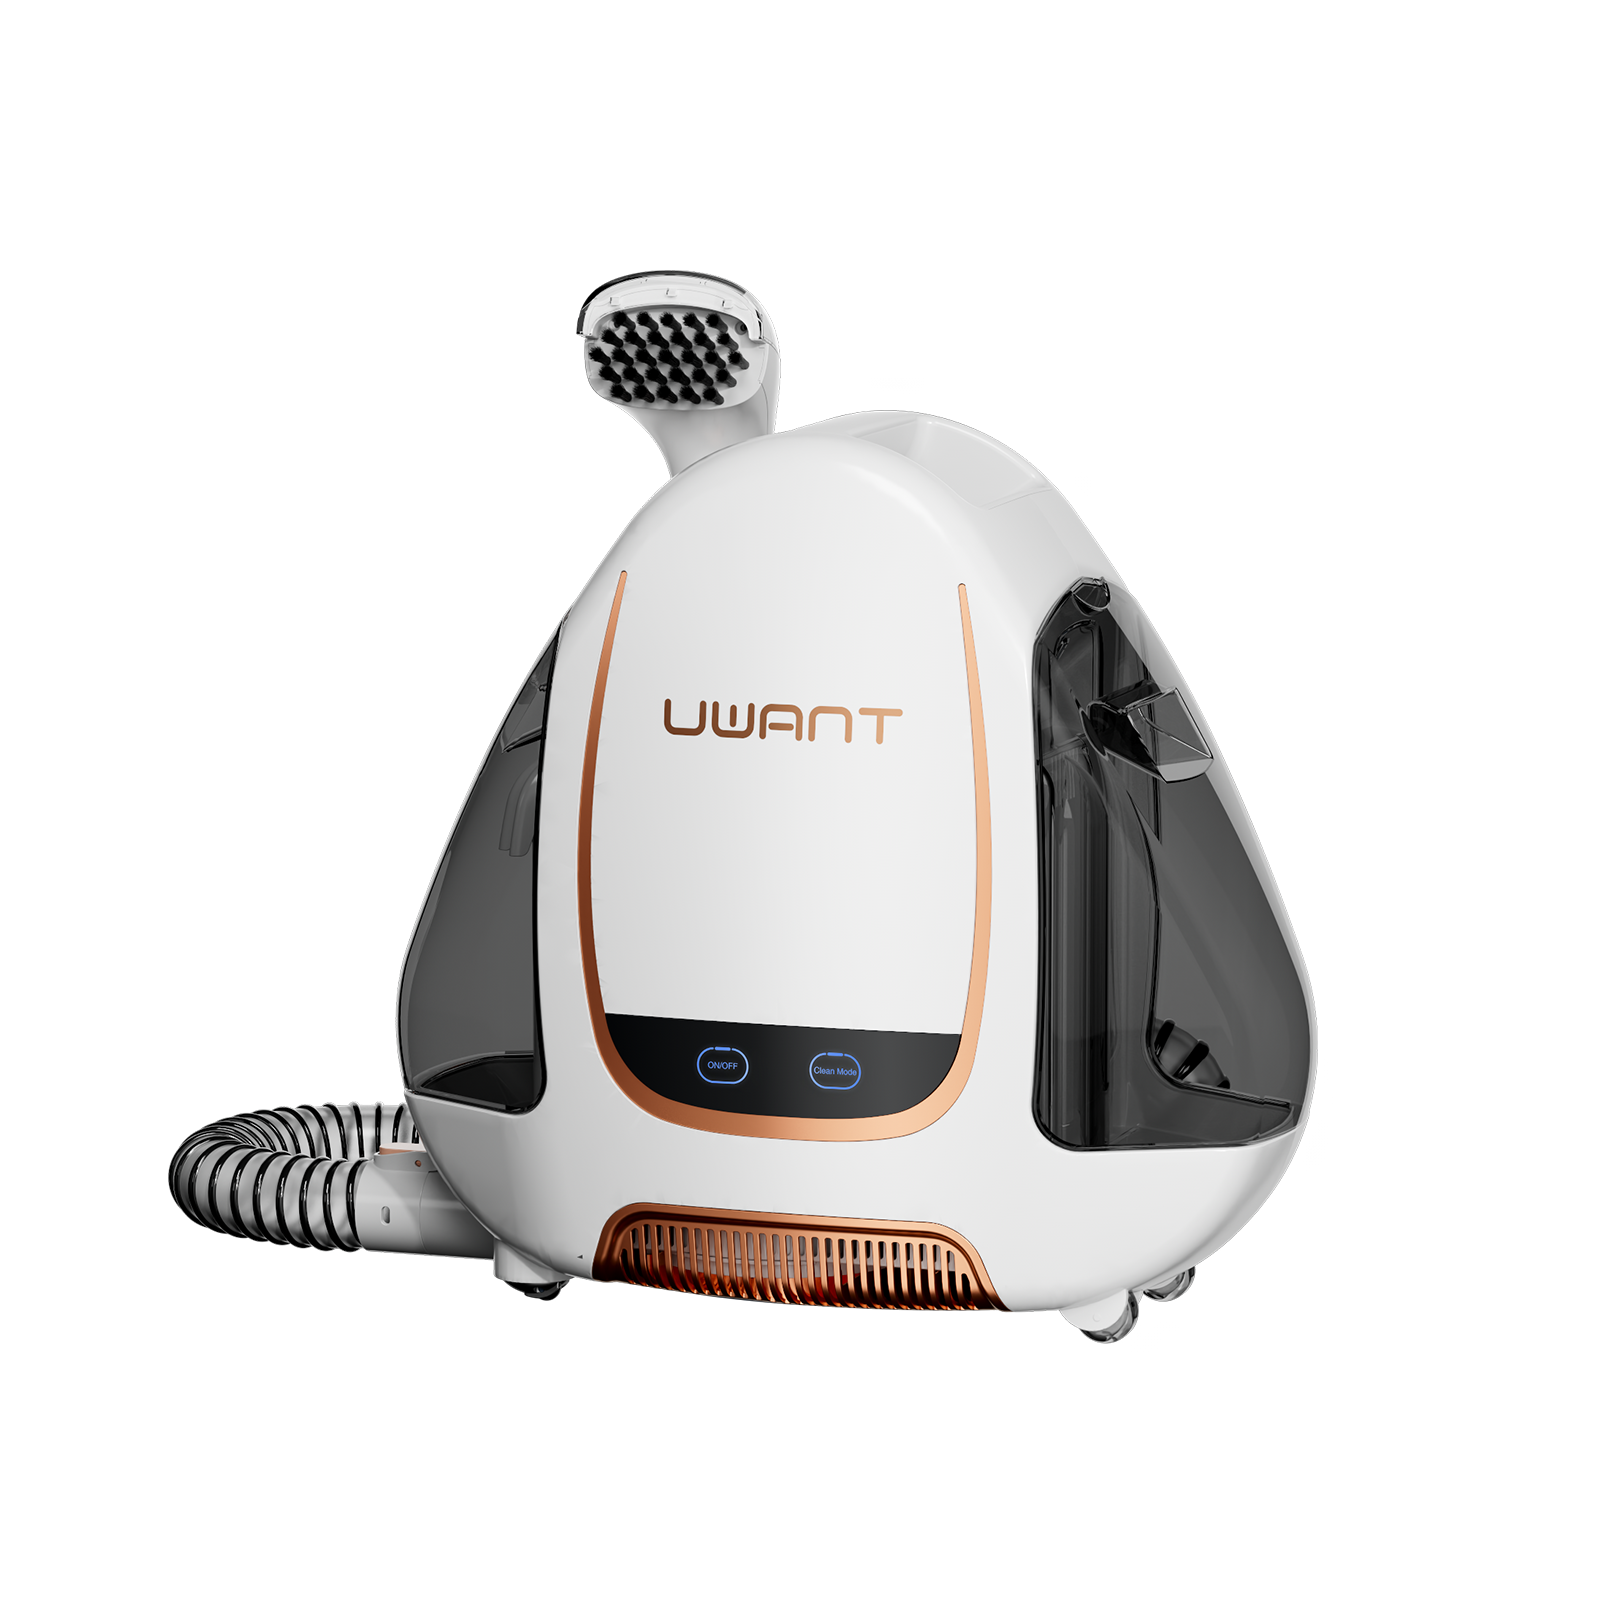 UWANT B100 Vacuum Cleaner Spot Cleaner Side View